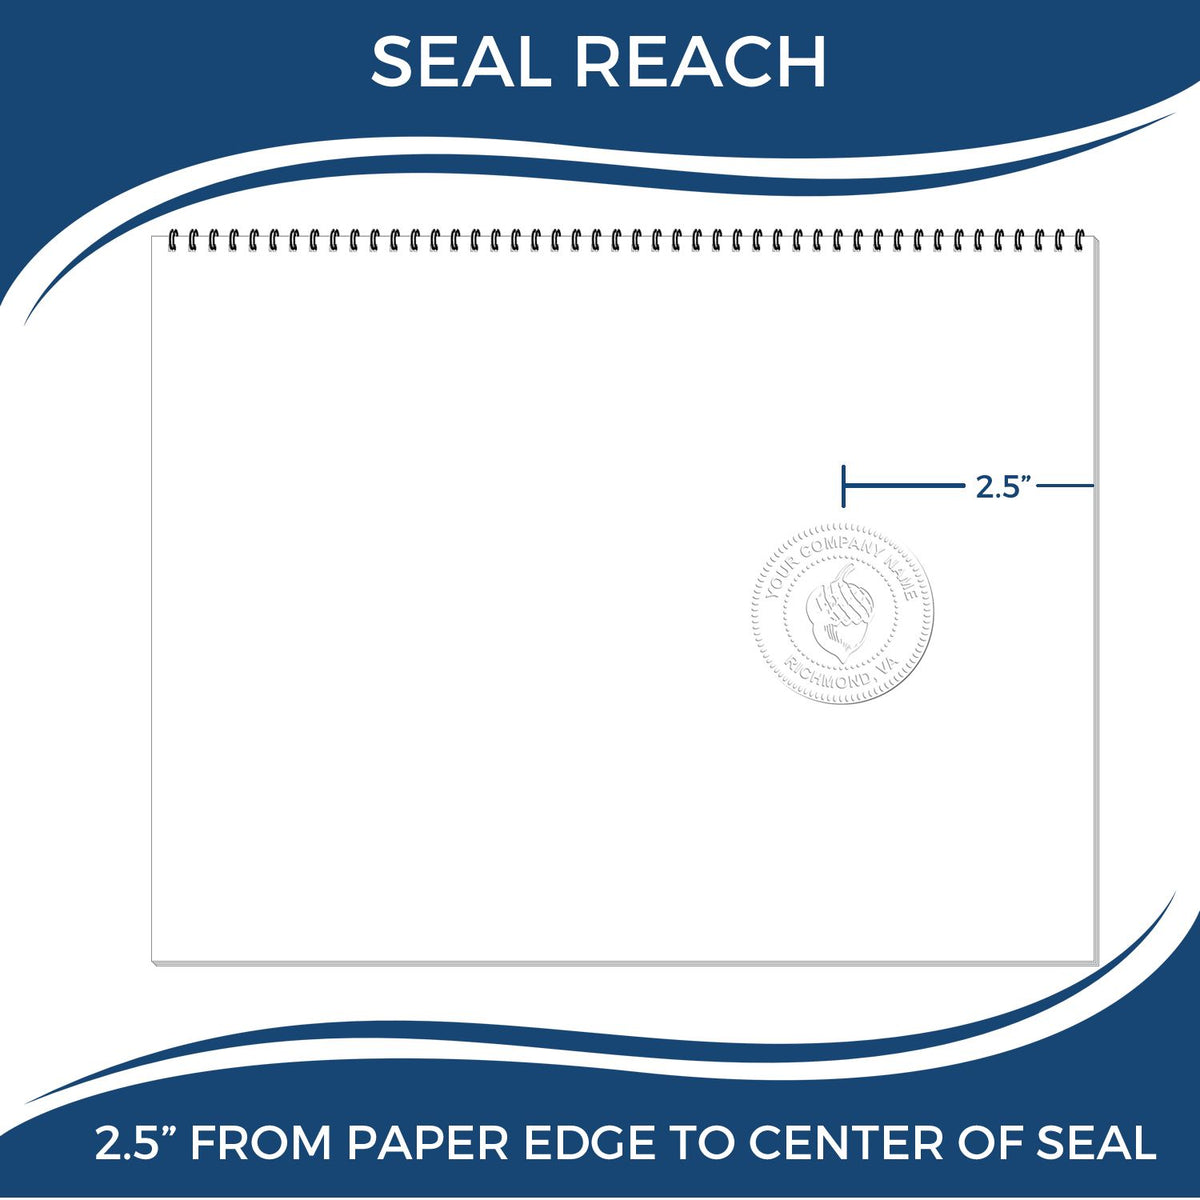 An infographic showing the seal reach which is represented by a ruler and a miniature seal image of the Heavy Duty Cast Iron New Hampshire Geologist Seal Embosser